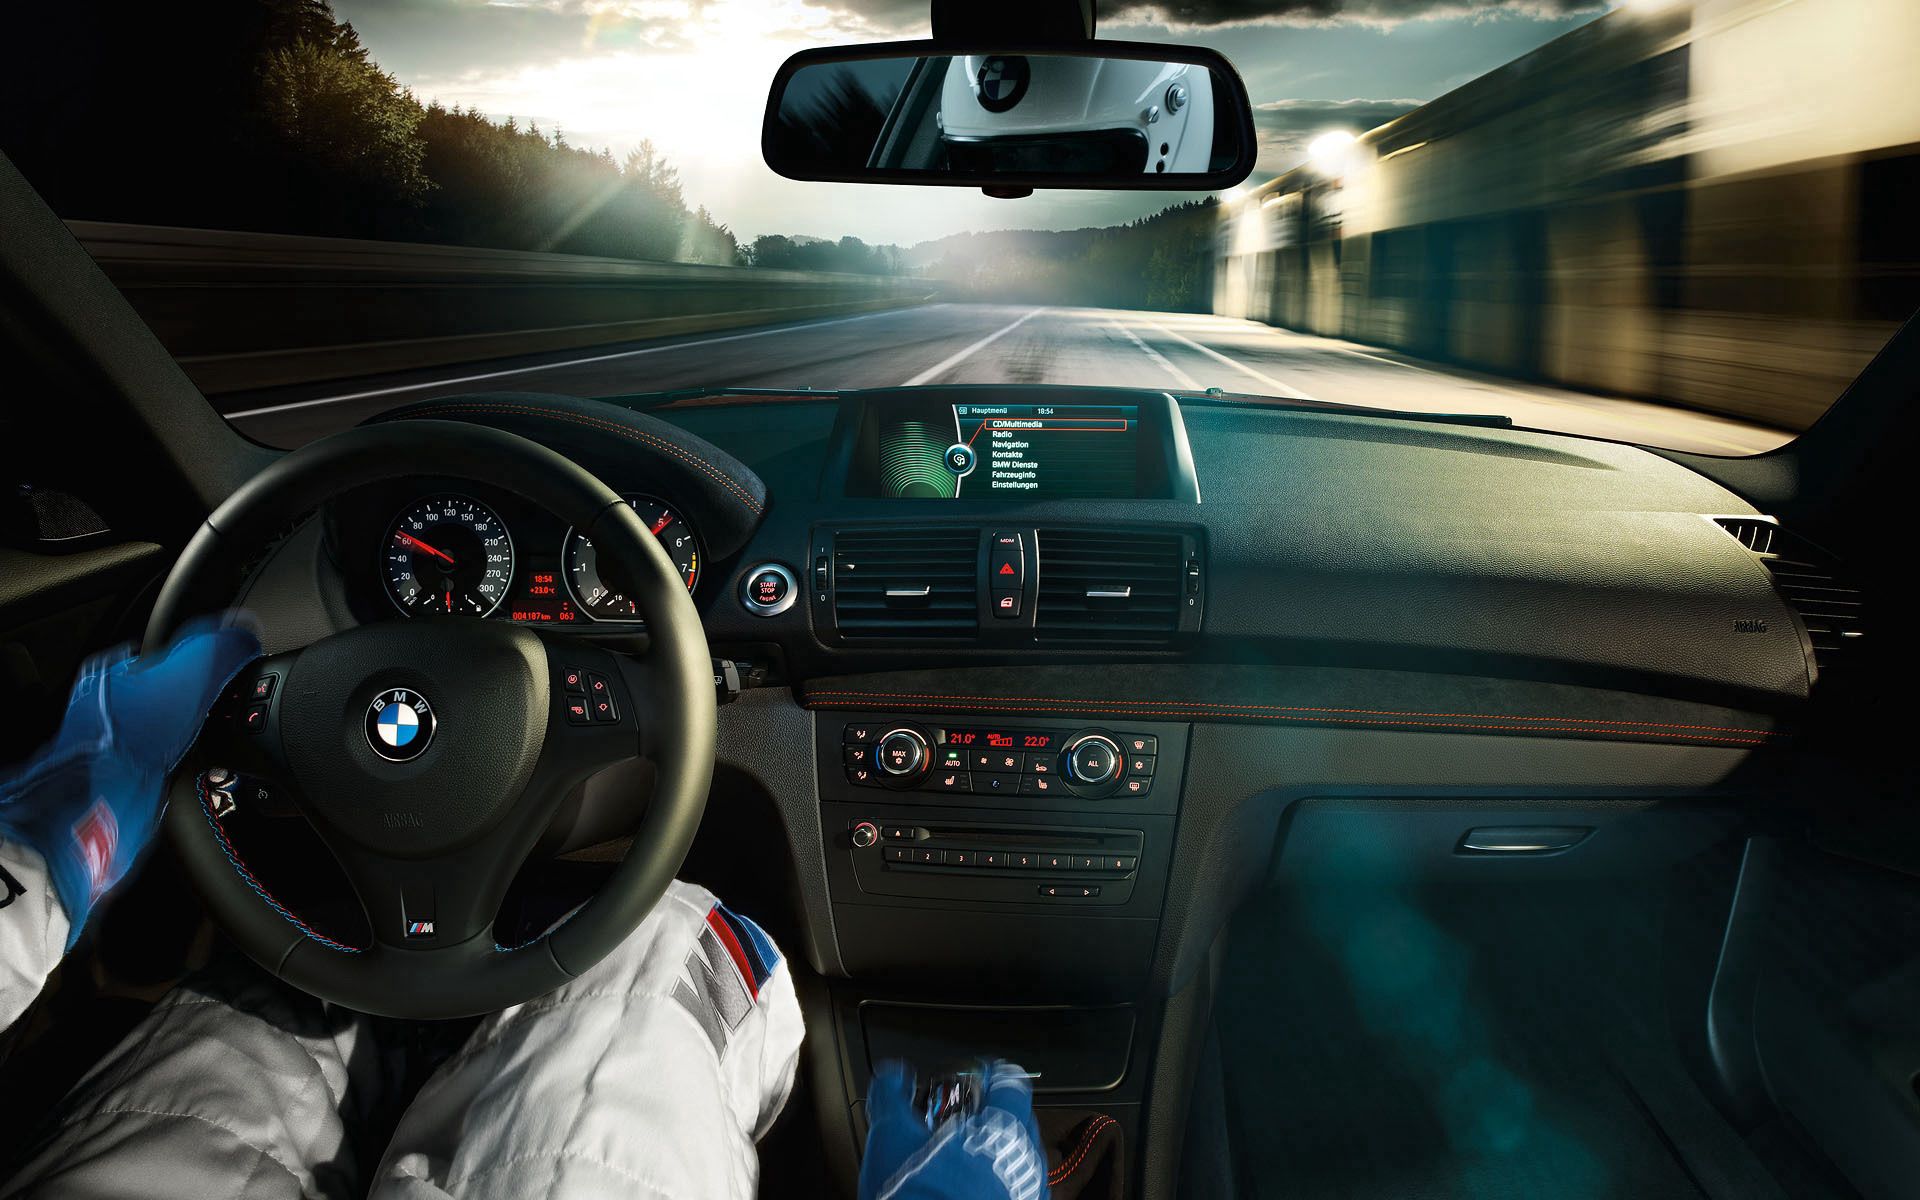 salon, bmw, sports, speed, track, racer, route cellphone